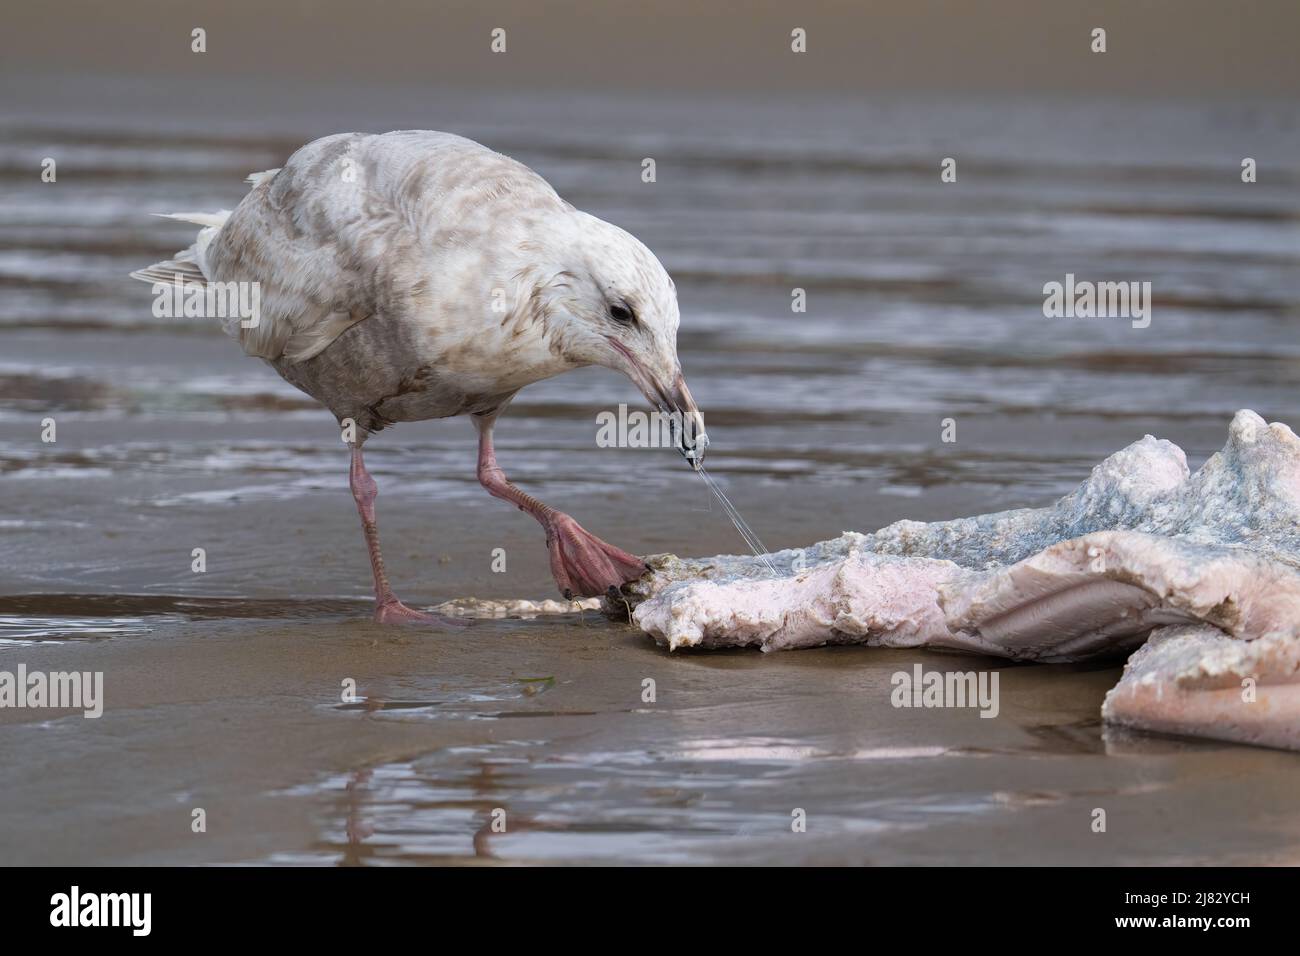 A gull (possibly a hybrid Glaucous-winged x Western aka 'Olympic' gull) eats a piece of dead whale at Cannon Beach in Oregon, United States. Stock Photo